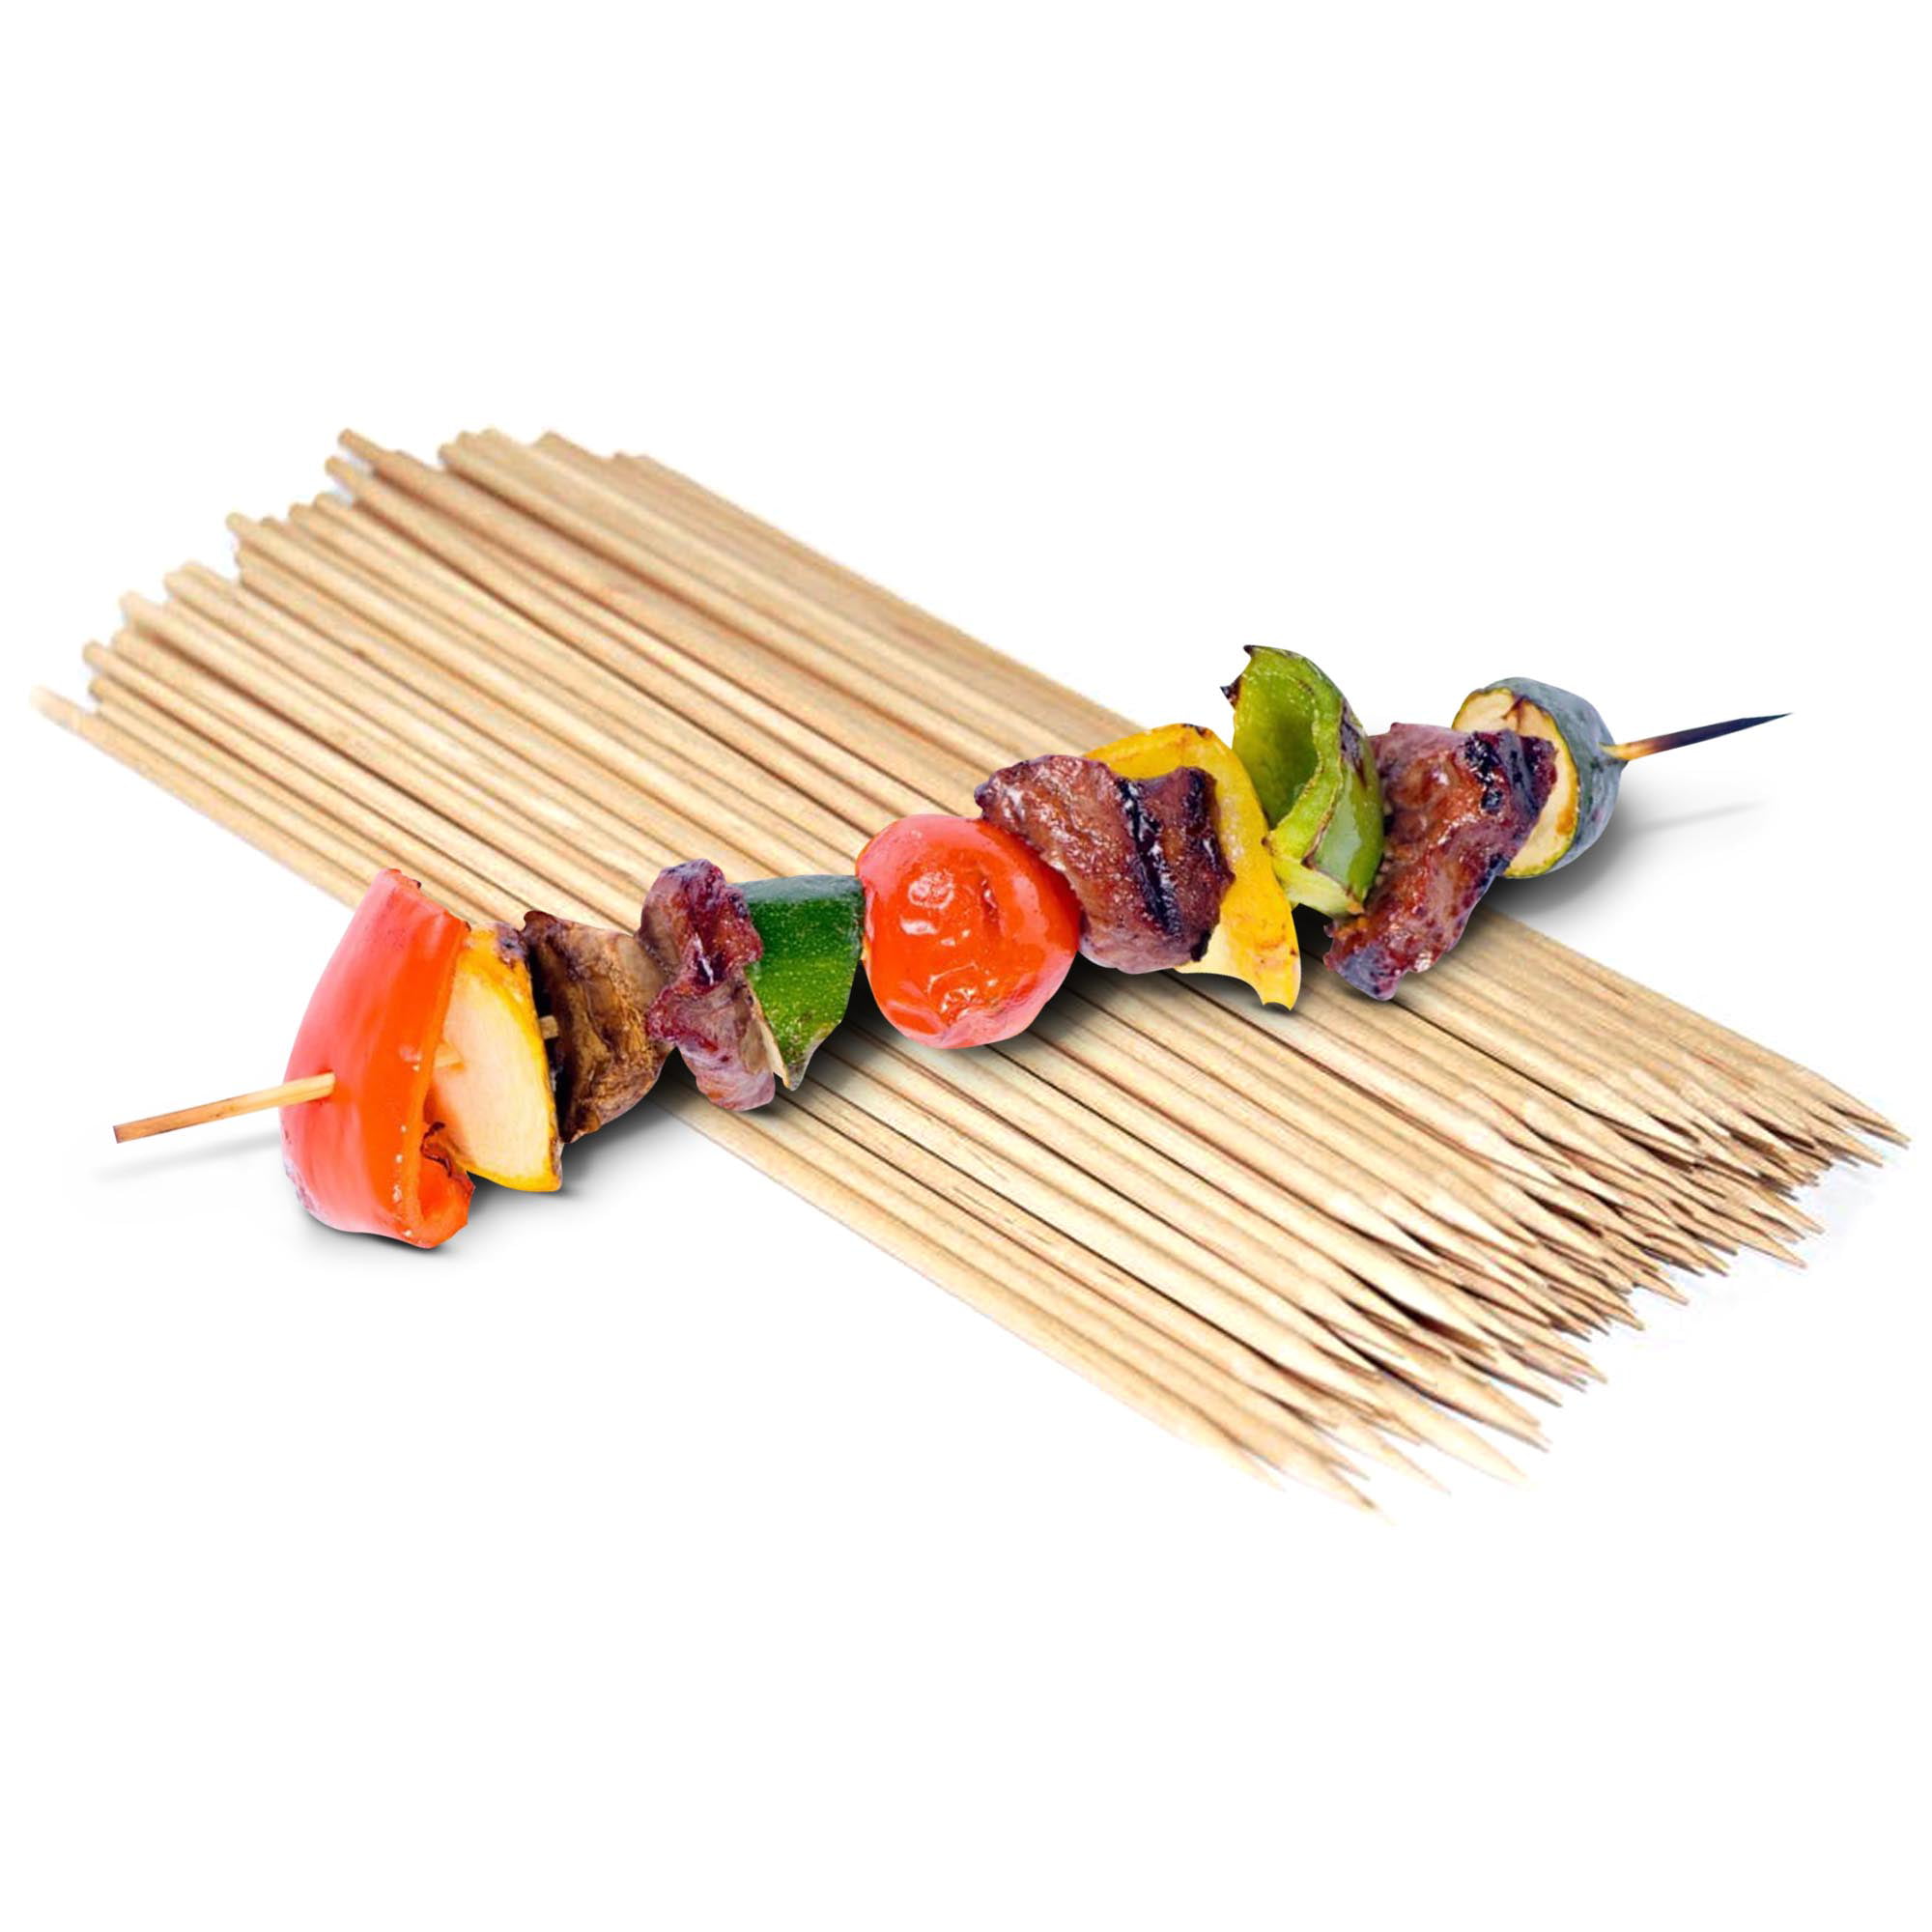 Skewers Wooden Bamboo BBQ Barbecue Paddle Sticks Grill Kebab Cocktail Shish